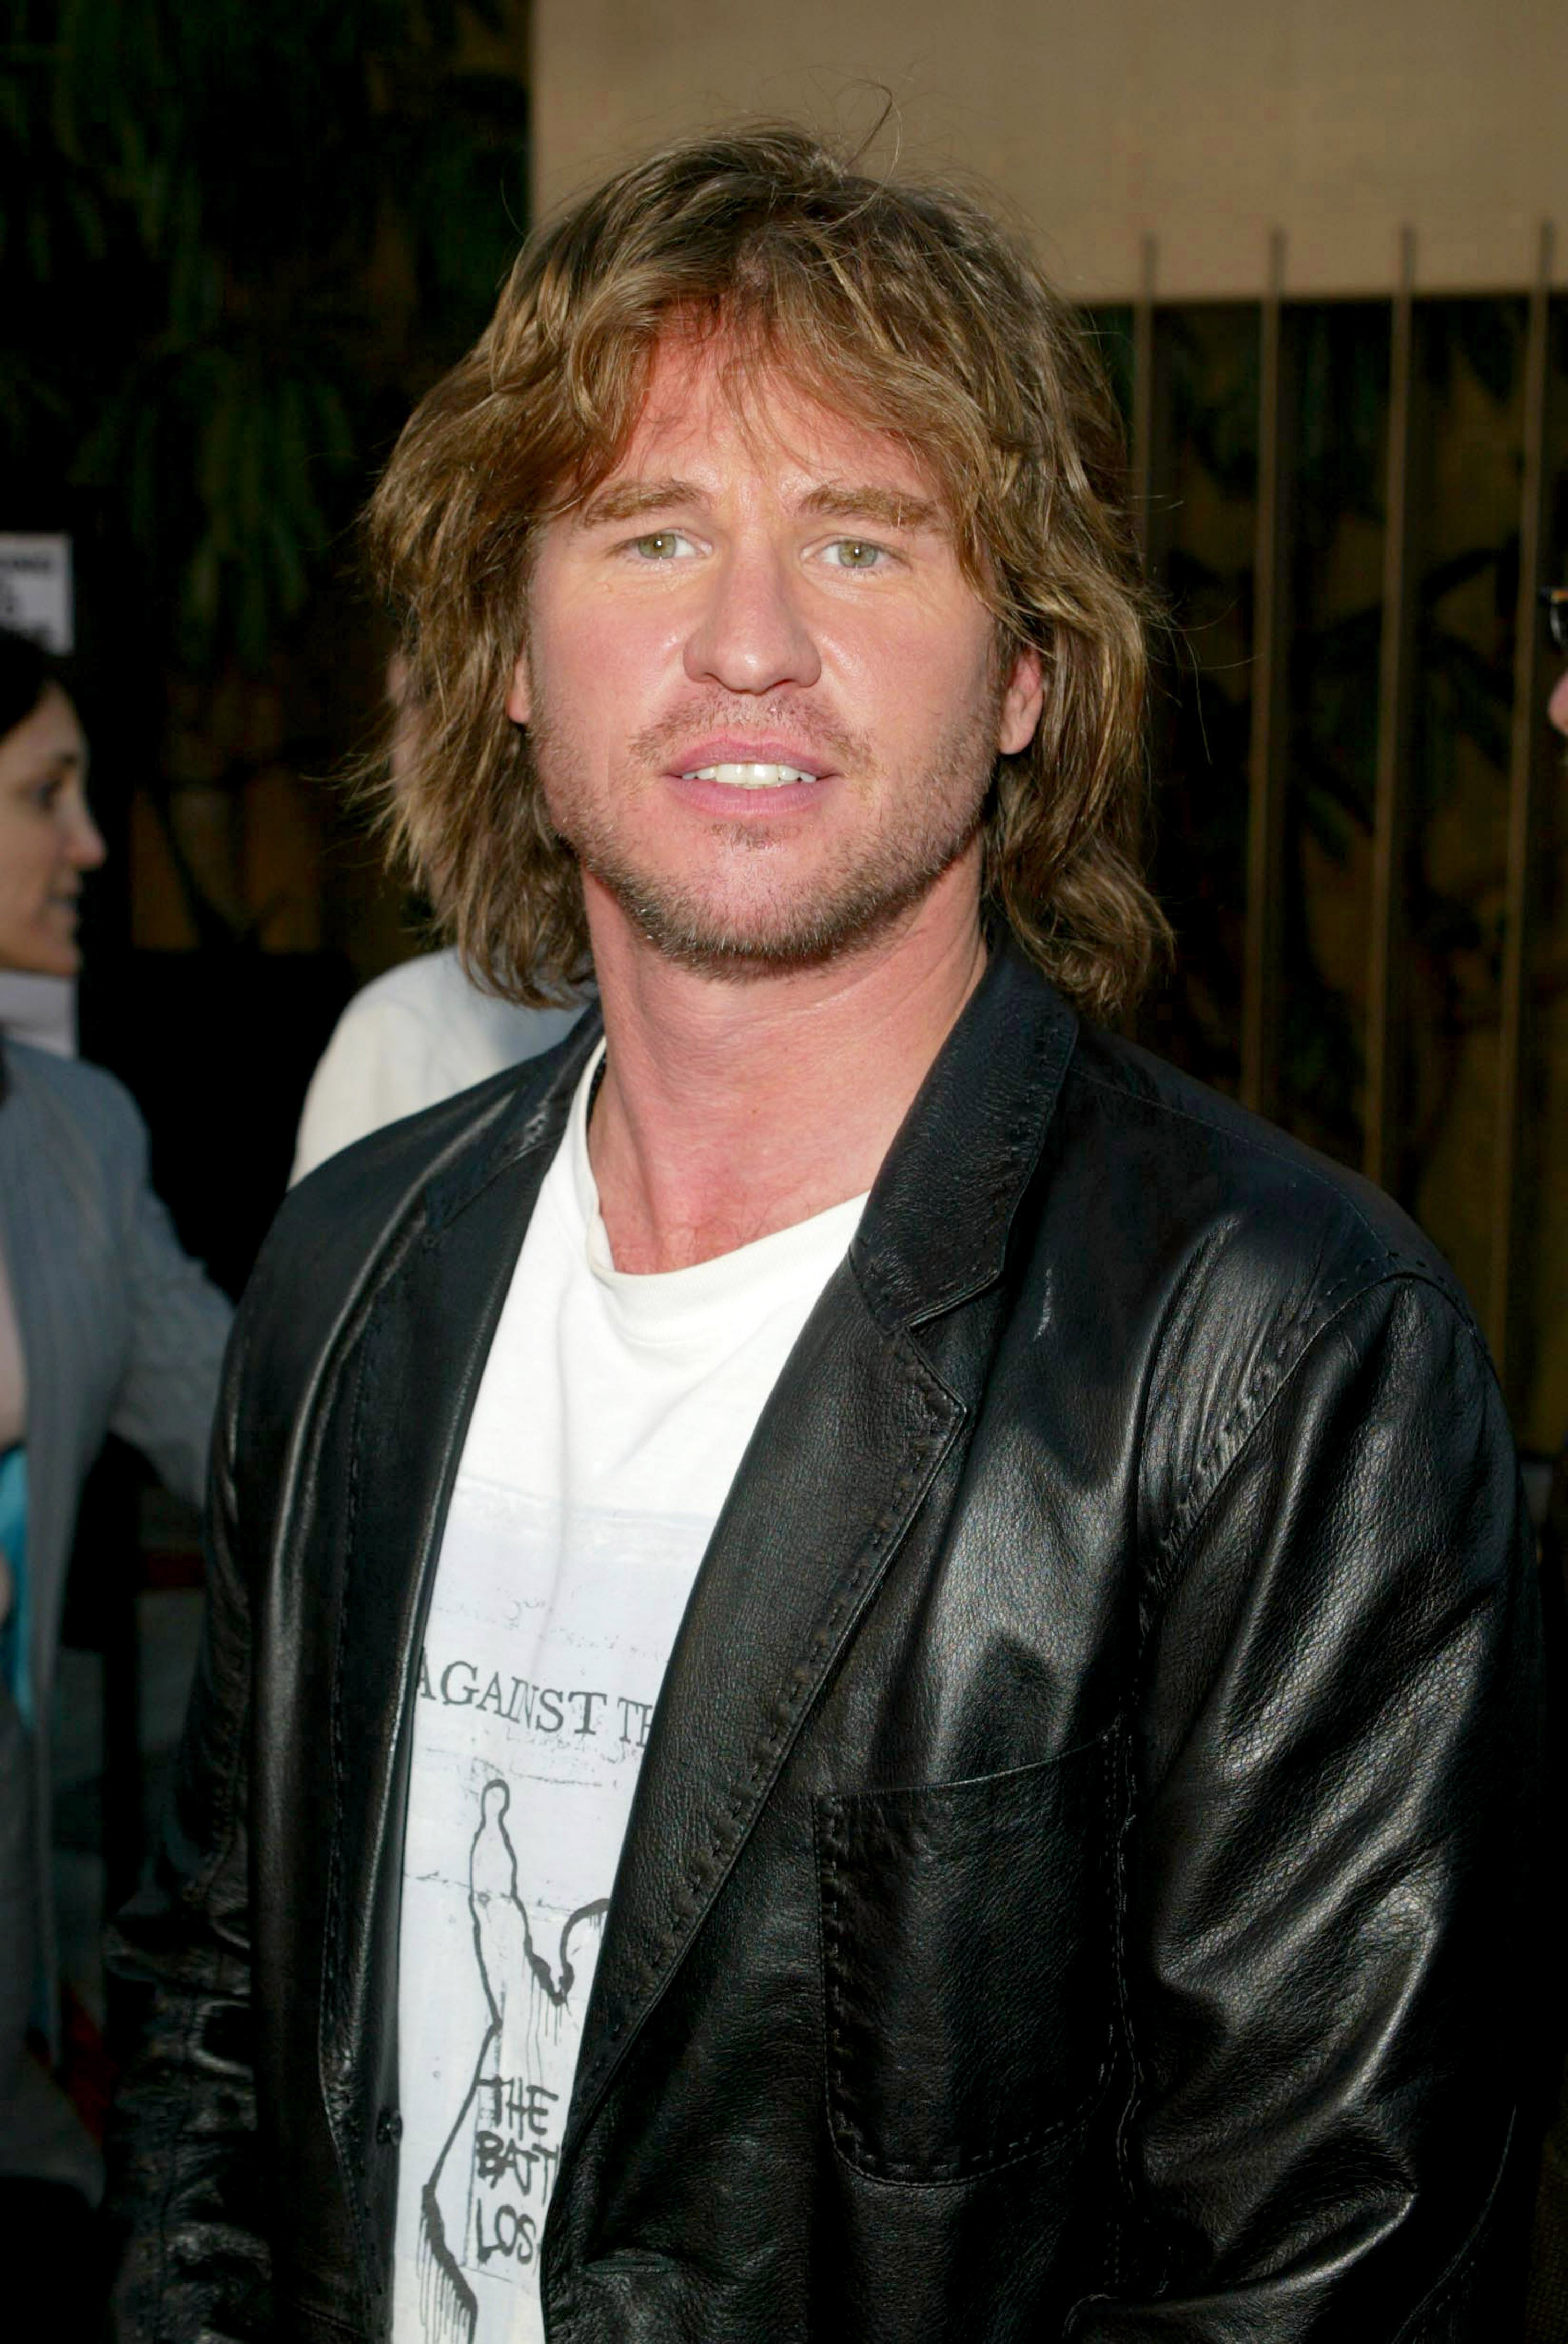 Val Kilmer during 'The Salton Sea' World Premiere at The Egyptian Theater in Hollywood, California. | Source: Getty Images